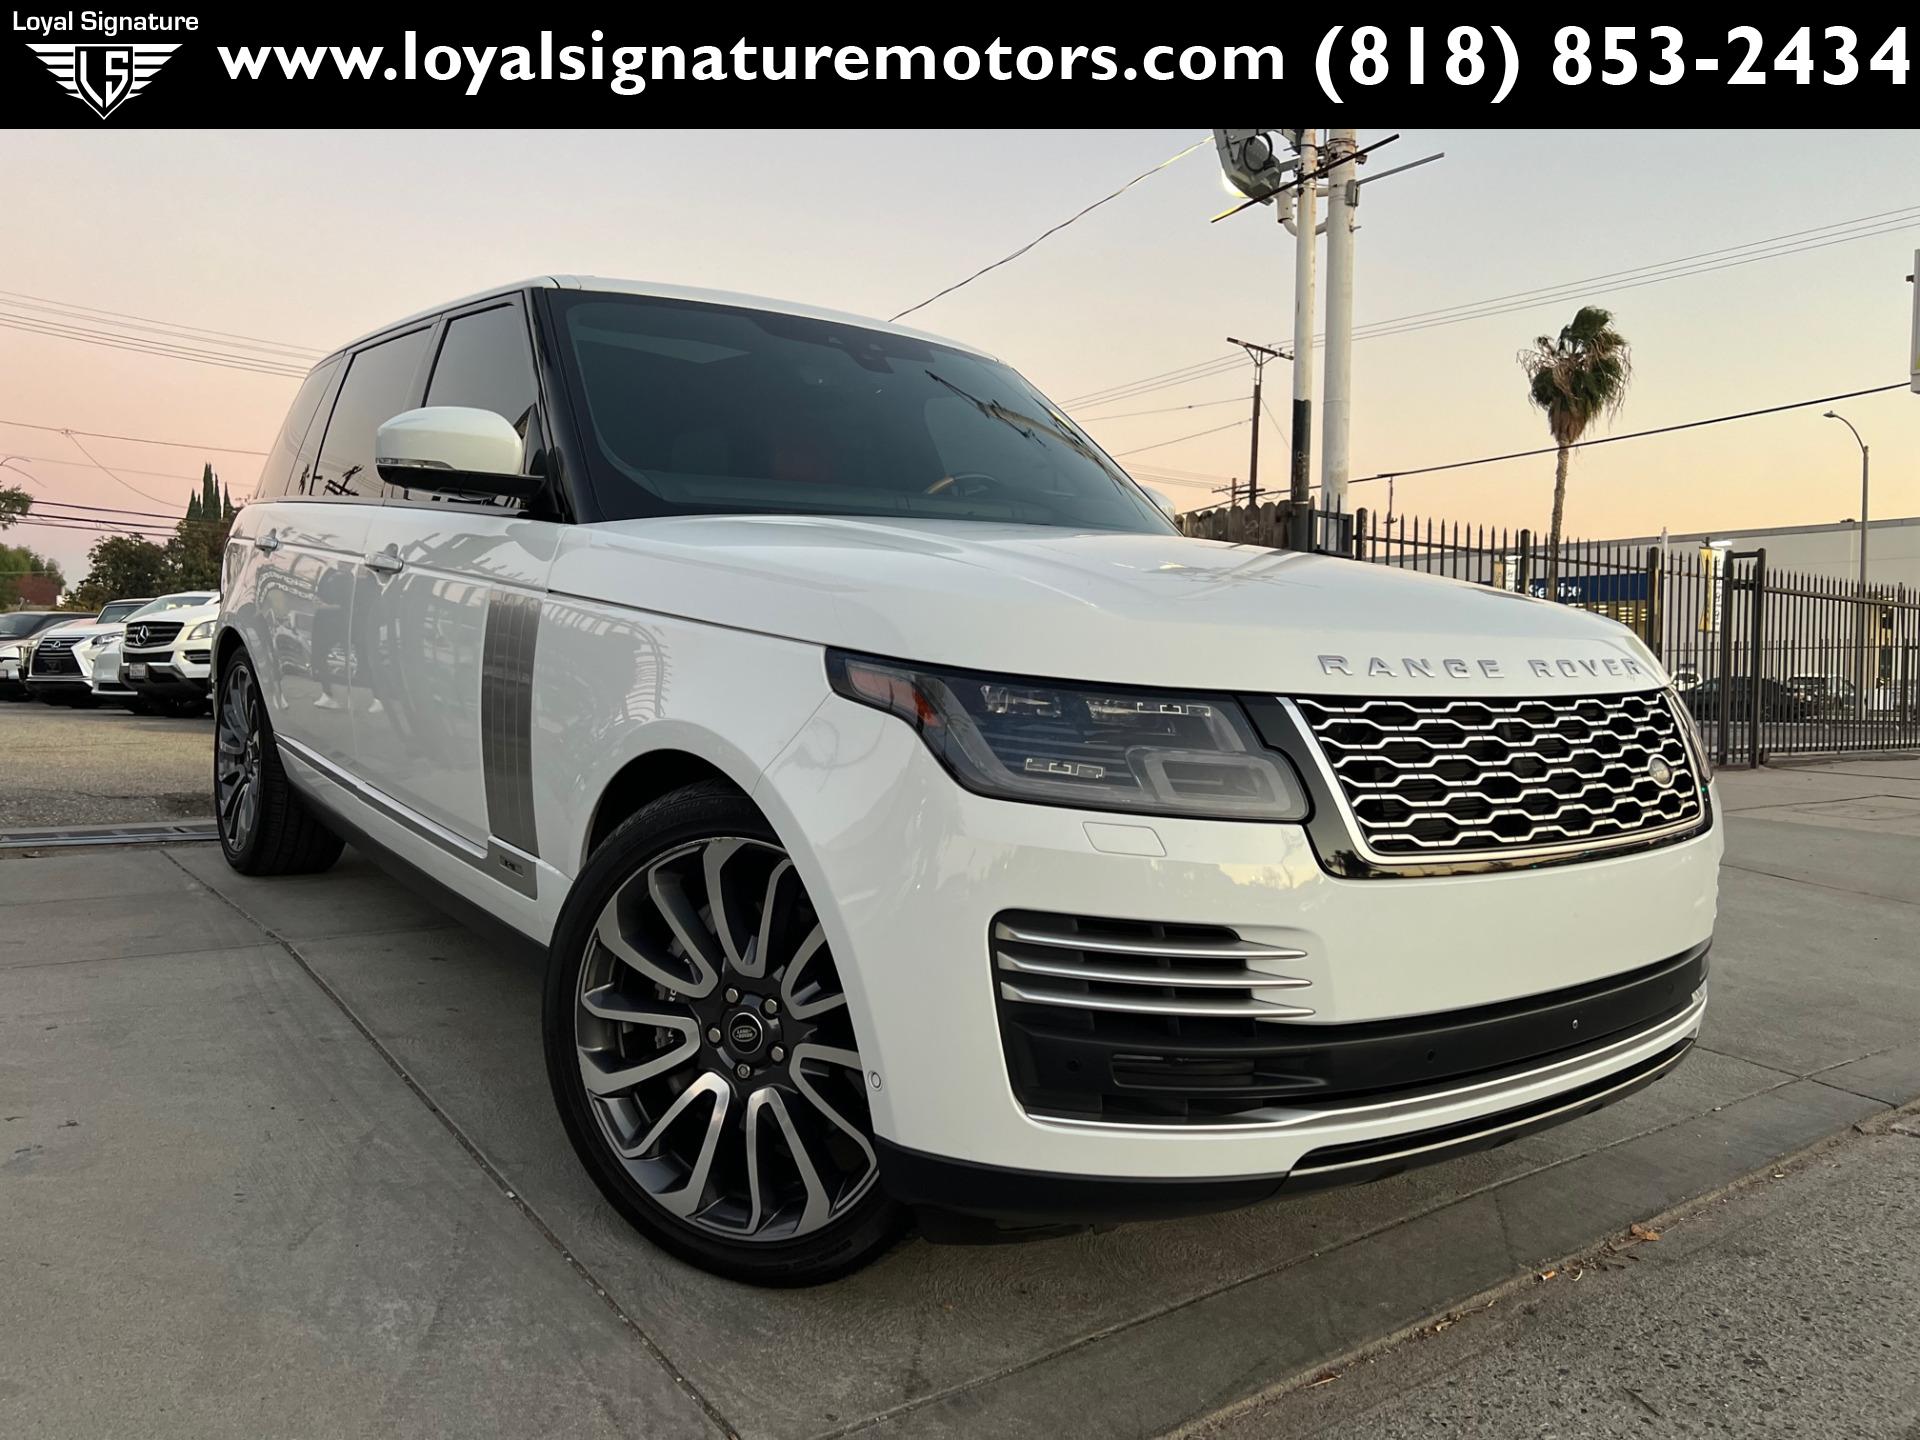 Used 2018 Land Rover Range Rover Autobiography LWB | Van Nuys, CA